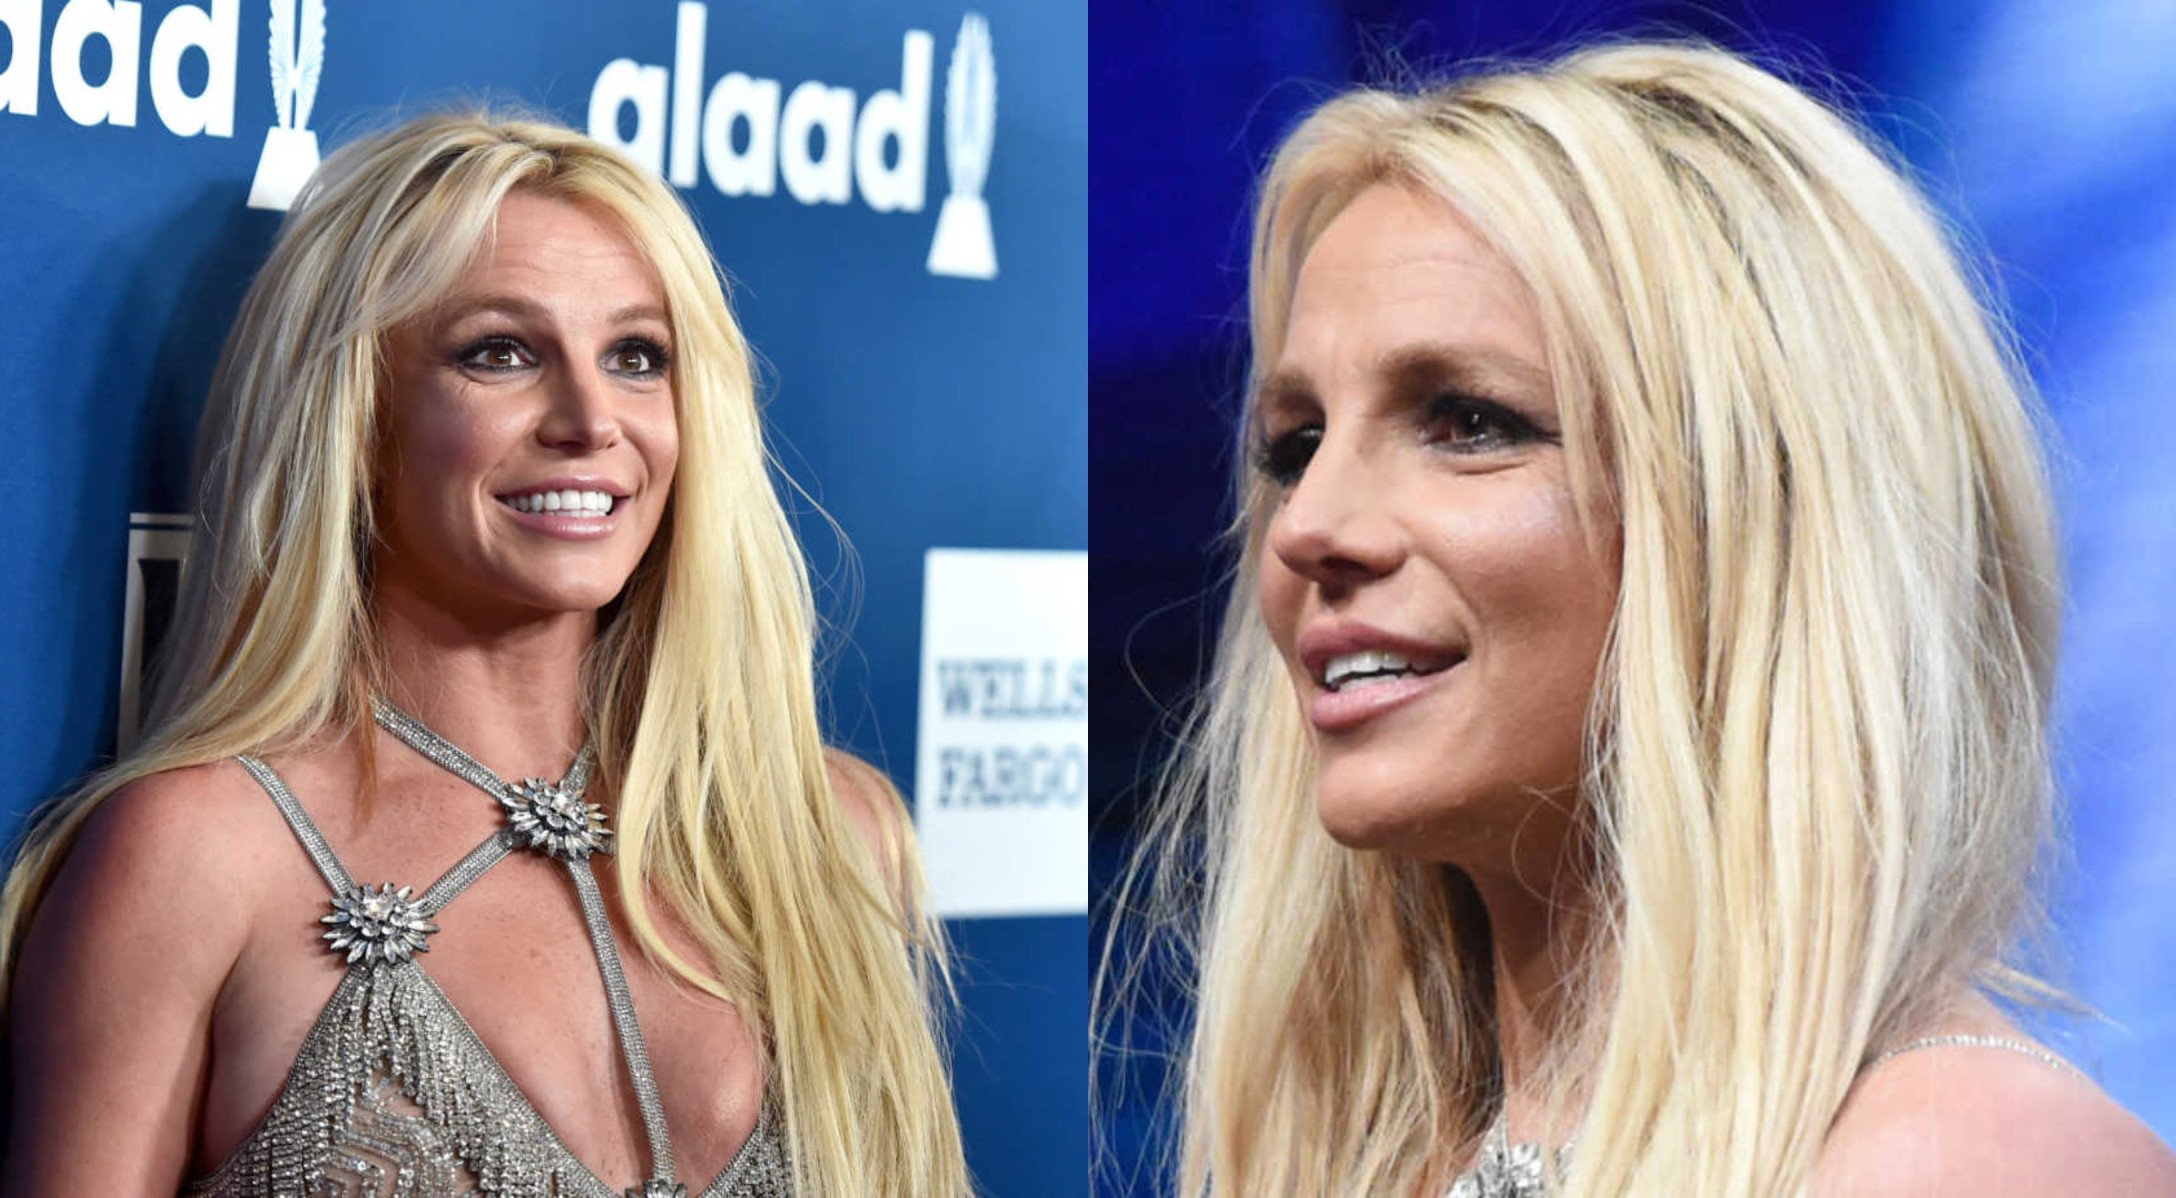 Britney Spears Announces She Changed Her Name to Xila in Bizarre Instagram Post